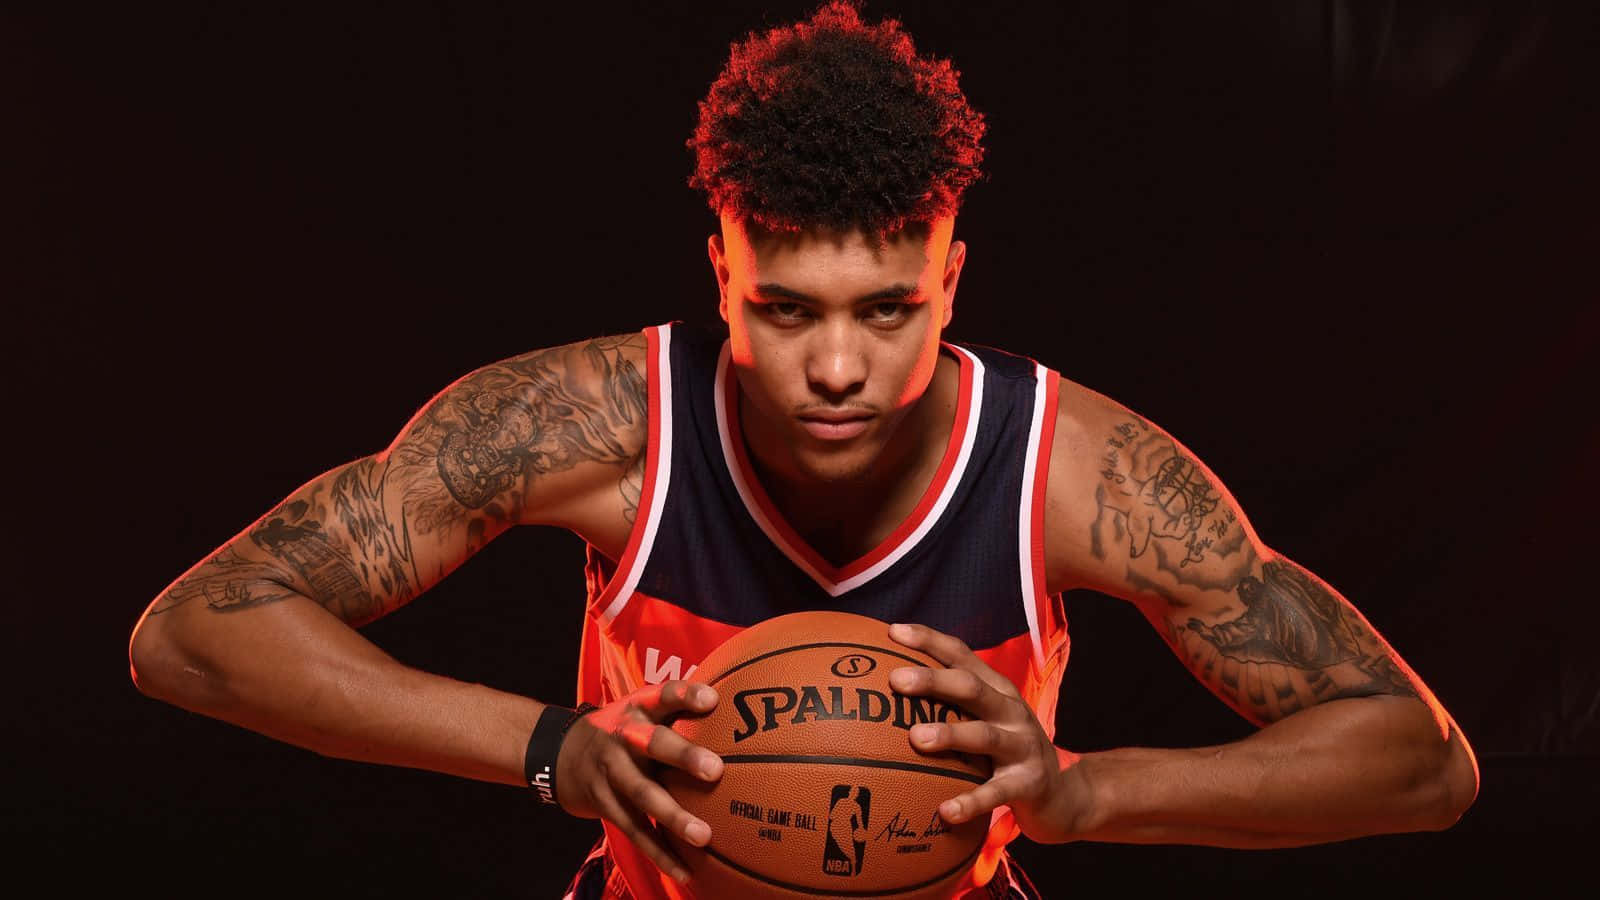 "Kelly Oubre Jr. - #12 of the Golden State Warriors" Wallpaper